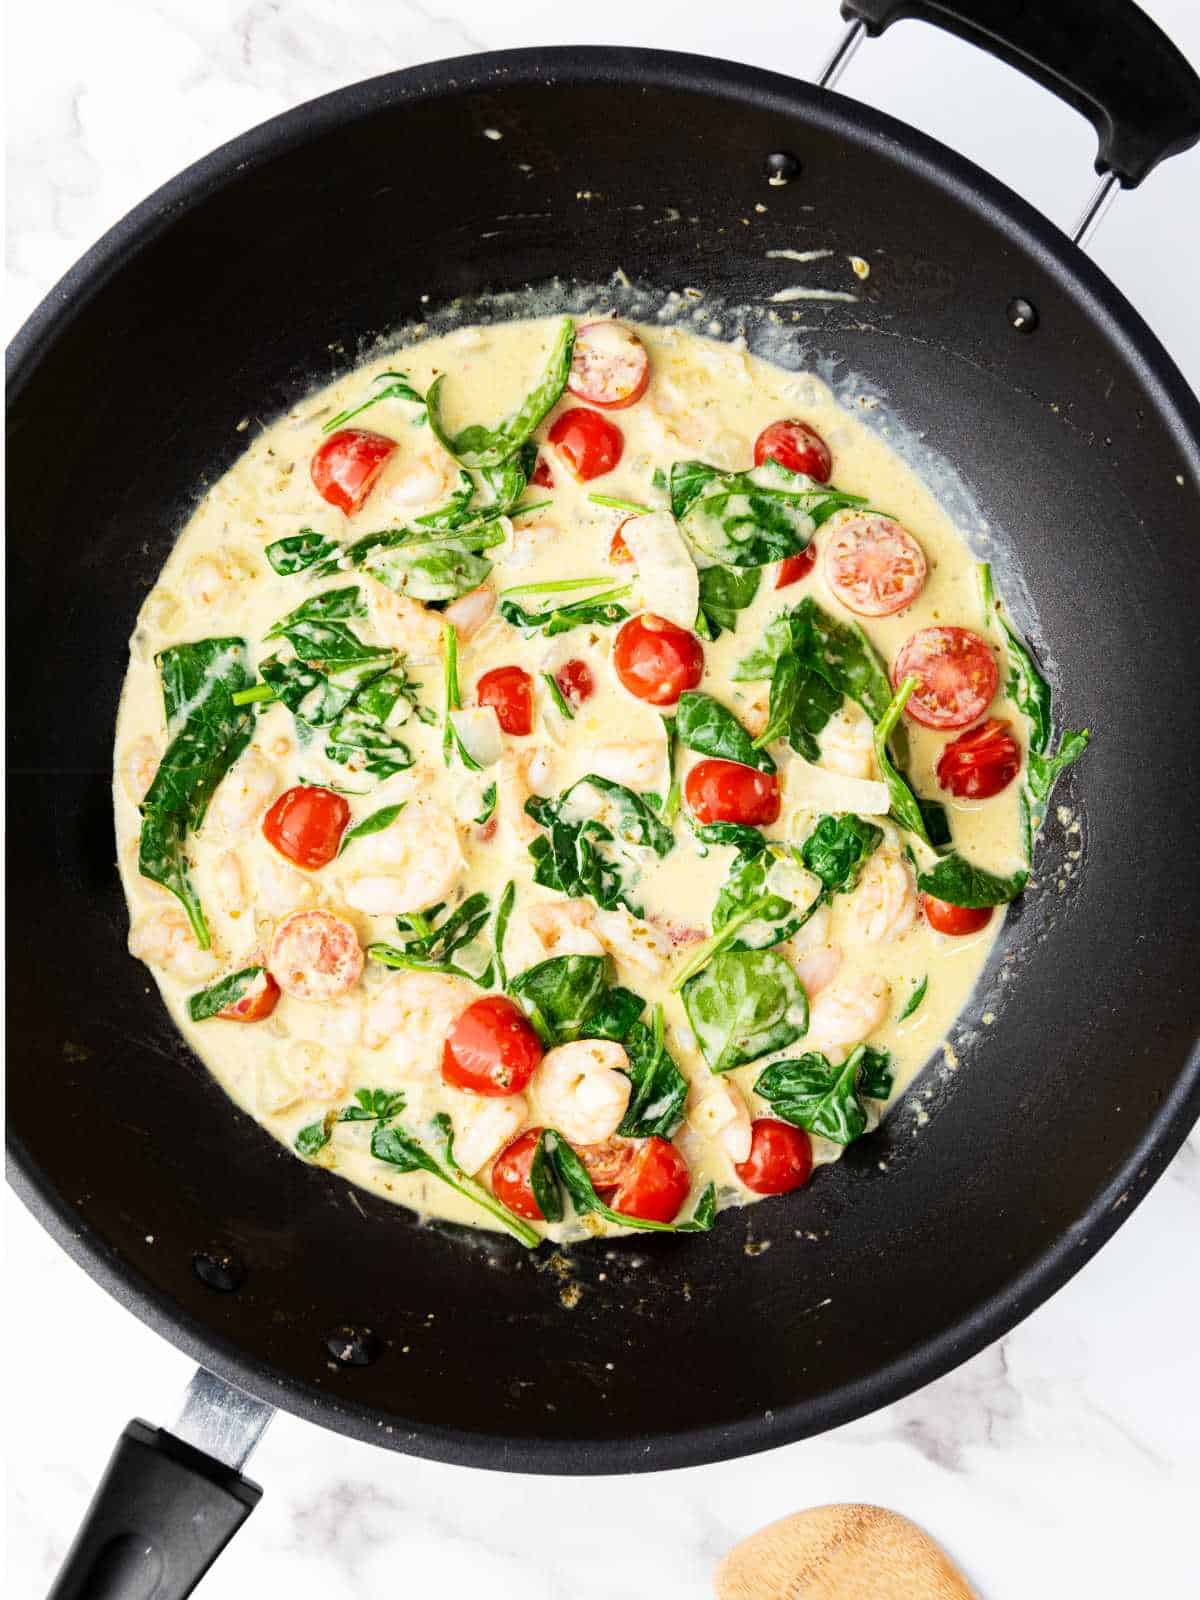 cherry tomatoes and spinach added to skillet of cream and shrimp.